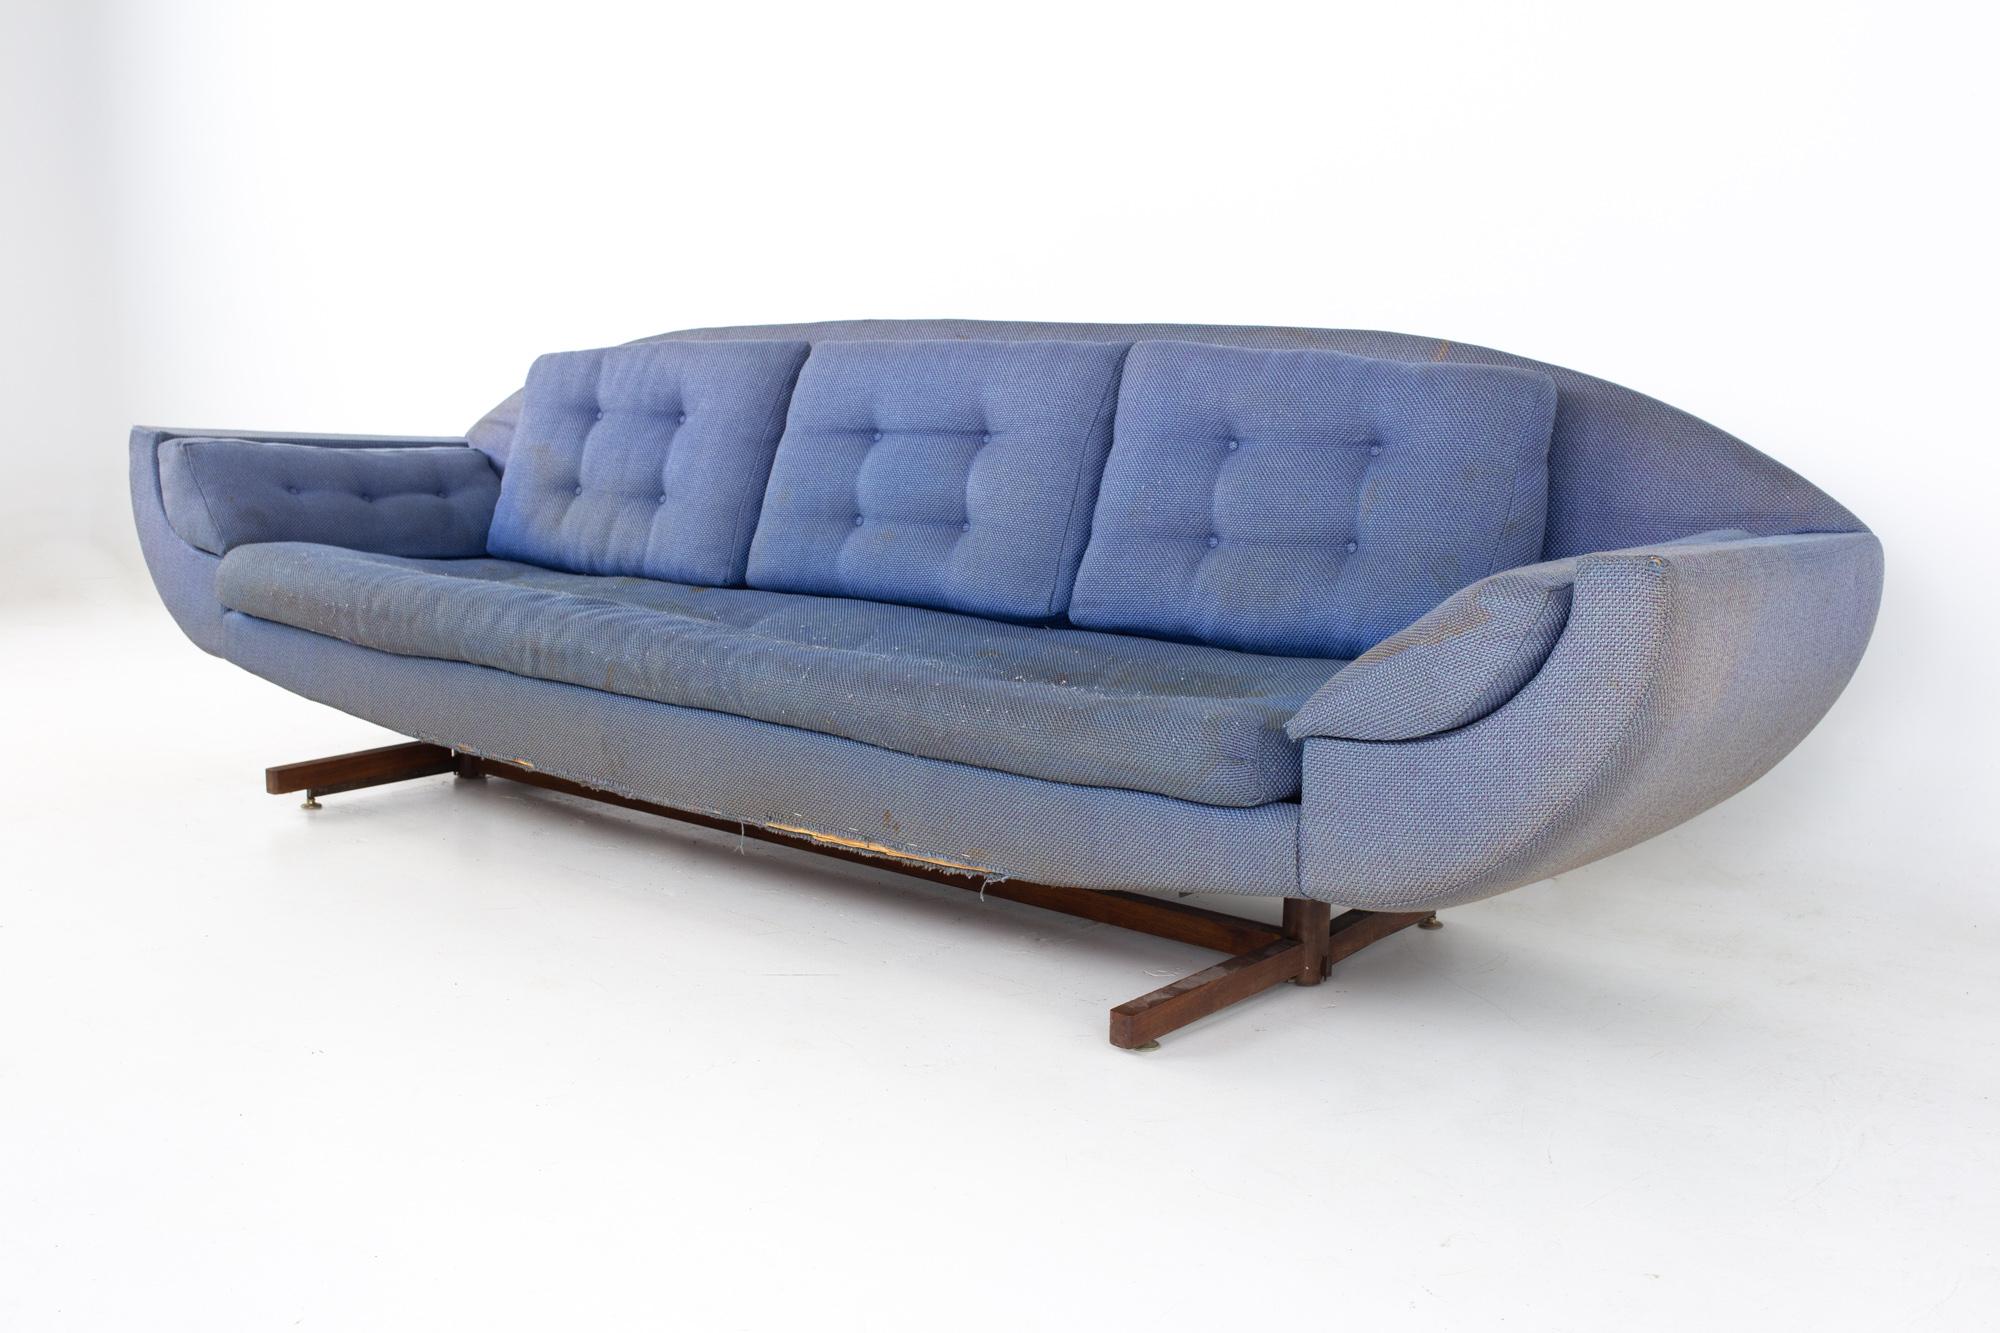 Johannes Andersen Capri style mid century Gondola sofa
Sofa measures: 108 wide x 34 deep x 31.5 inches high, with a seat height of 16 inches

All pieces of furniture can be had in what we call restored vintage condition. That means the piece is